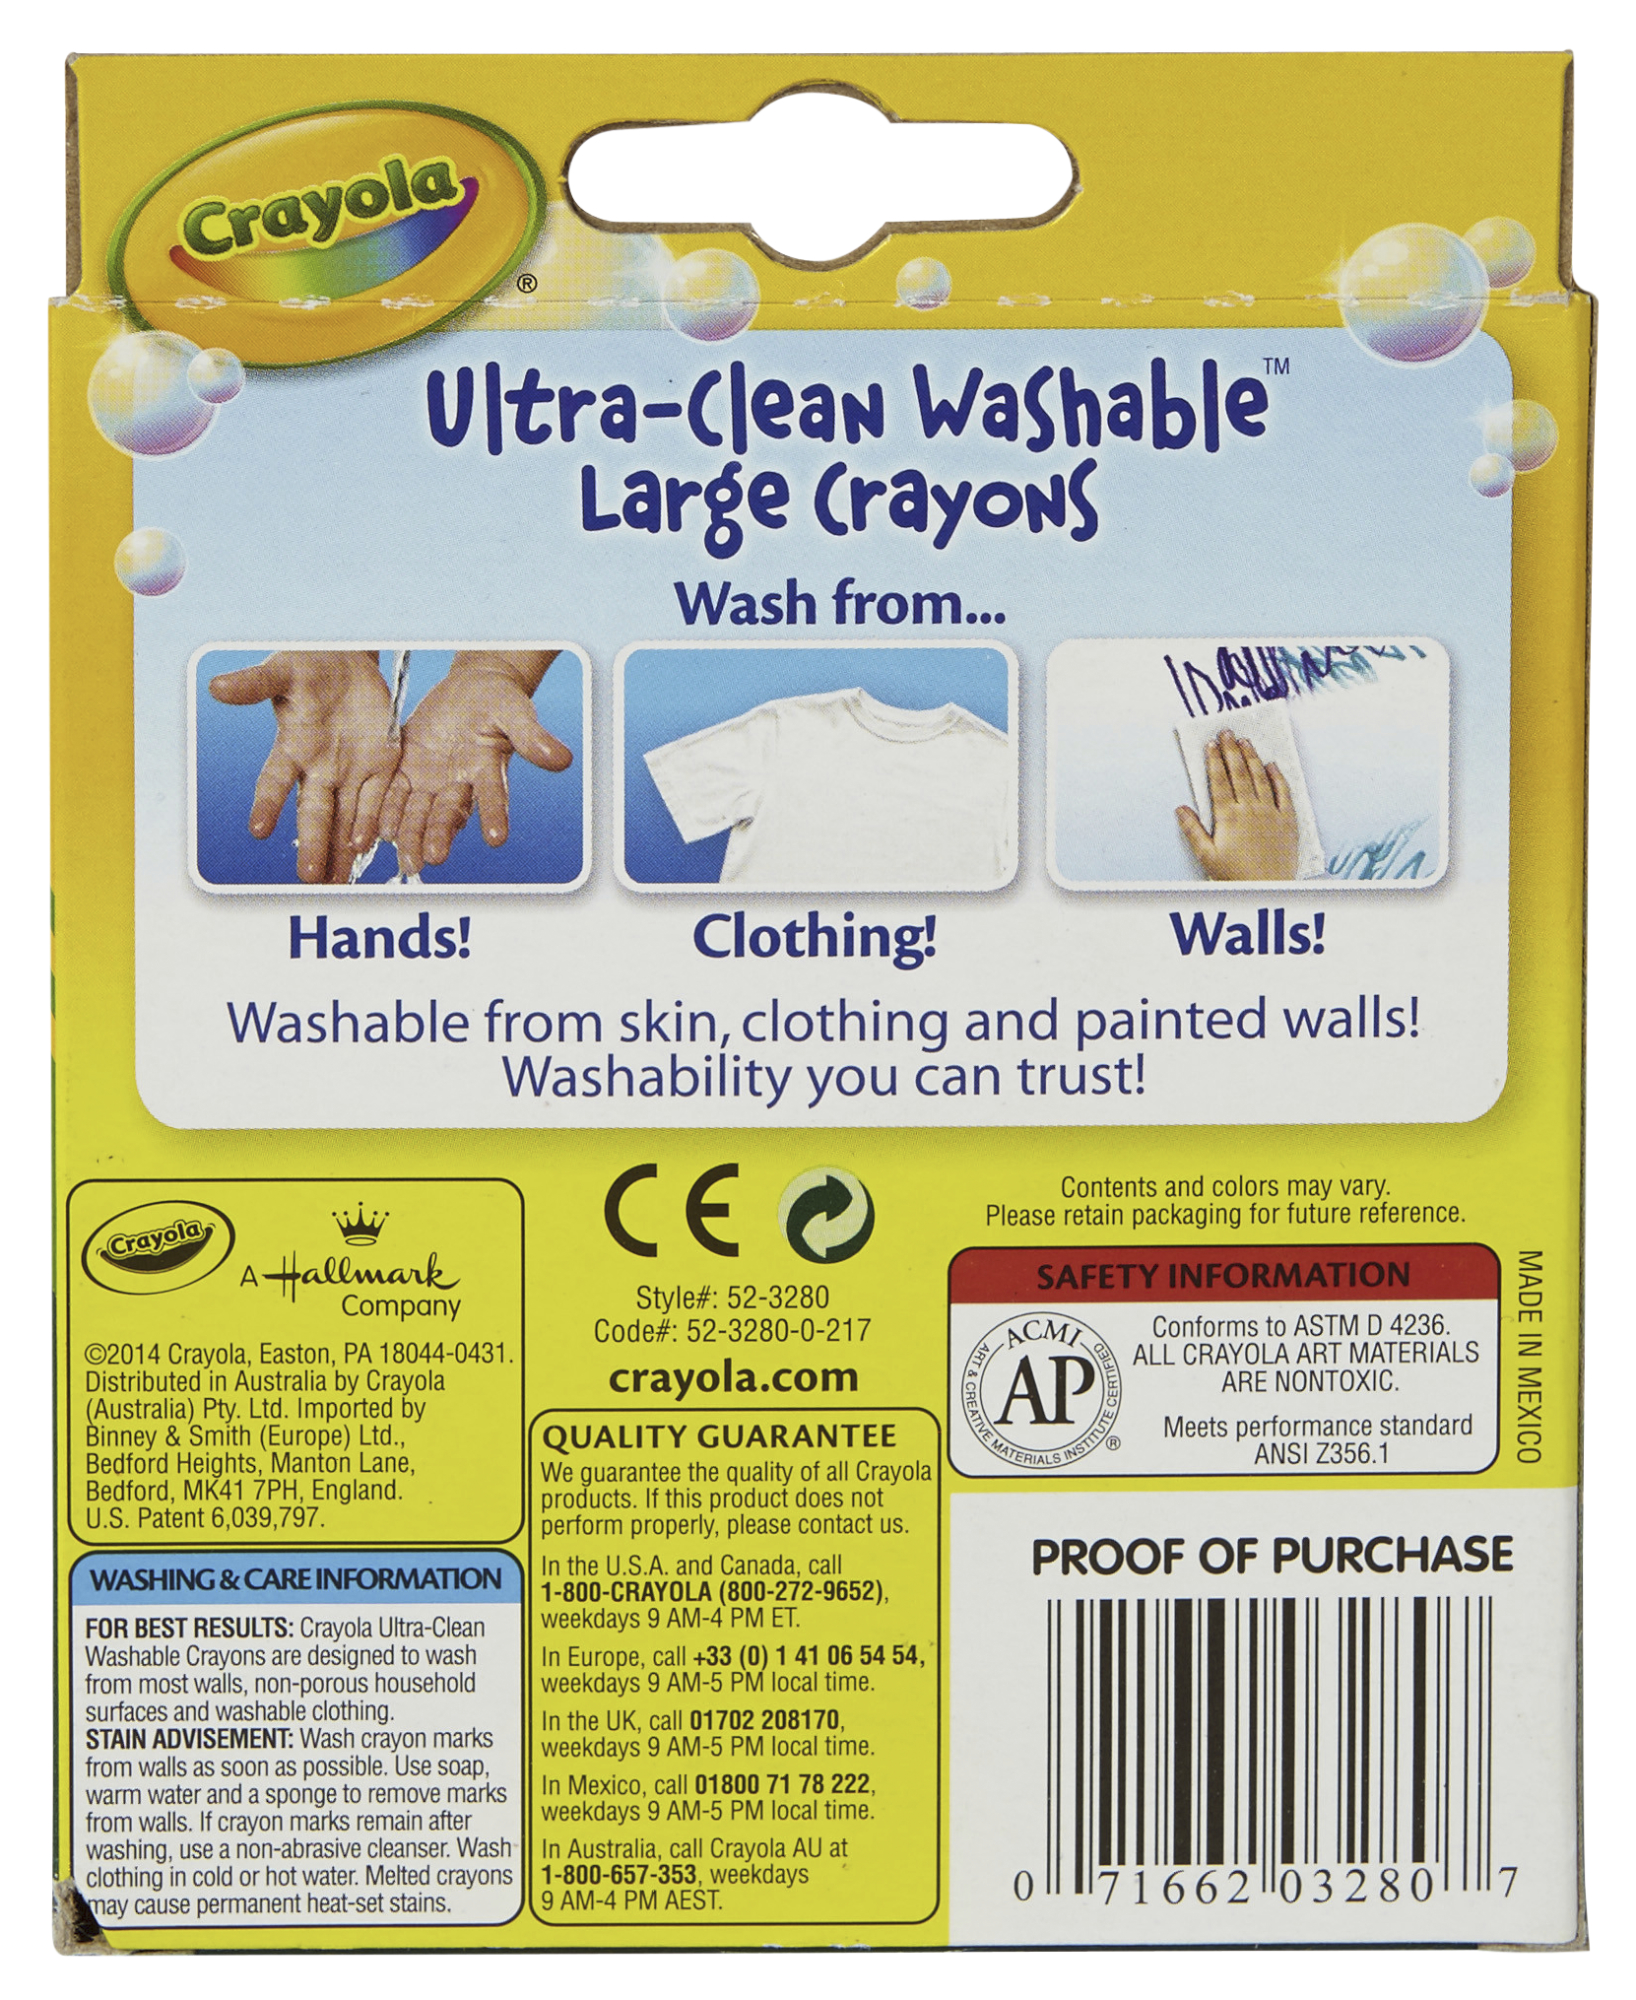 Crayola Ultra Clean Washable Color Max Crayons, Large Size, Set of 8, Multi-Color - image 4 of 6